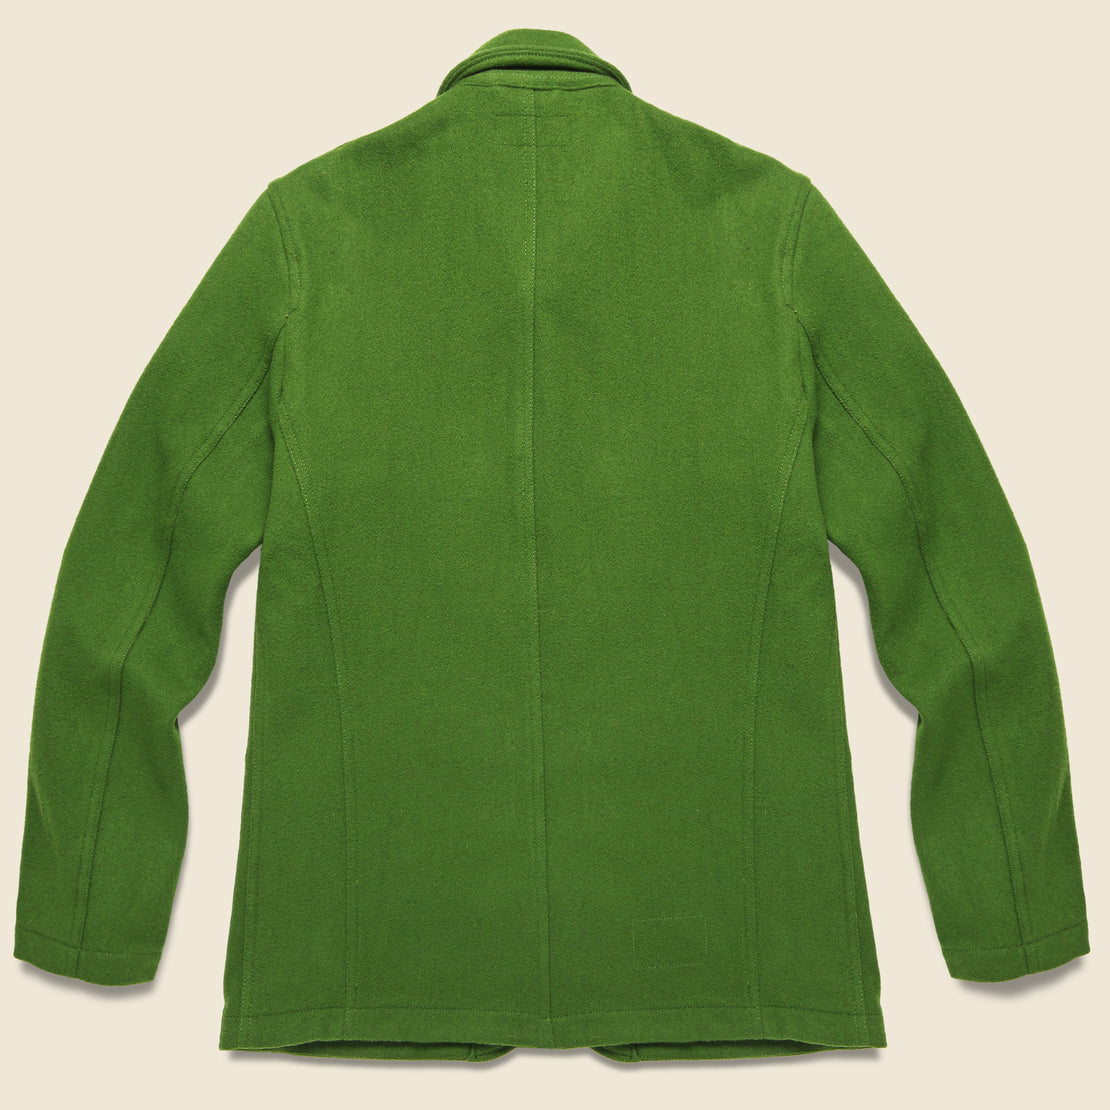 Mowbray Long Bakers Jacket - Green - Universal Works - STAG Provisions - Outerwear - Coat / Jacket